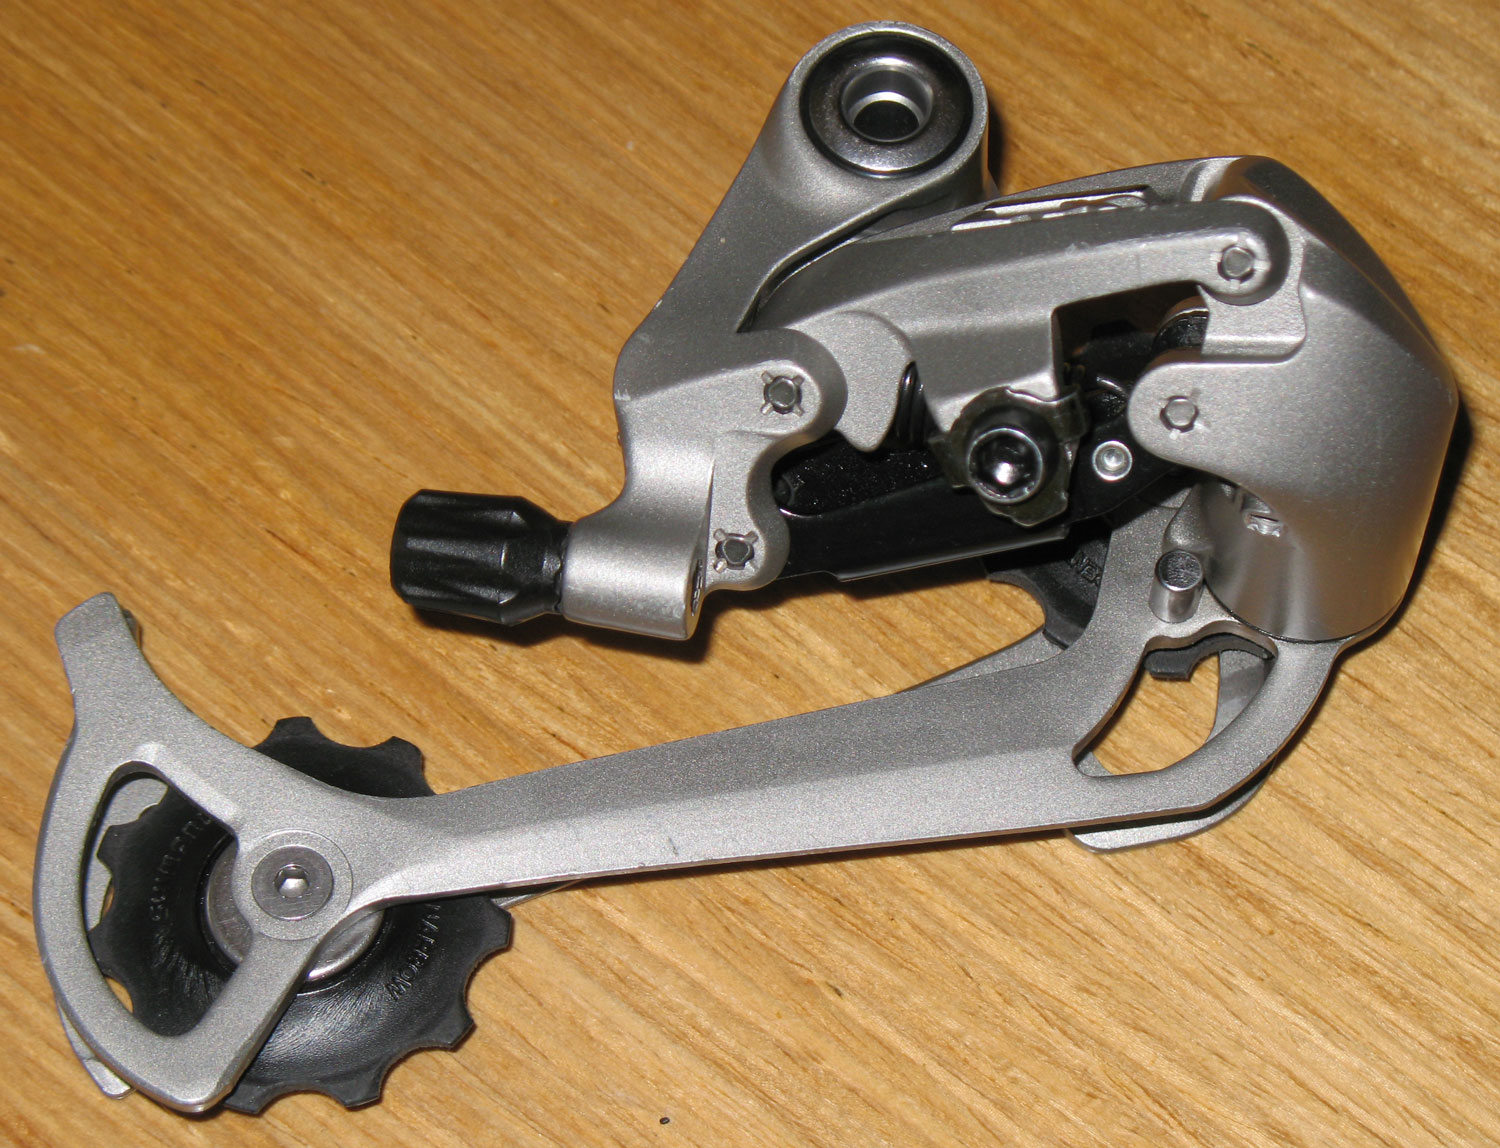 Shimano Deore LX front and rear gear shifters and mechs | Retrobike